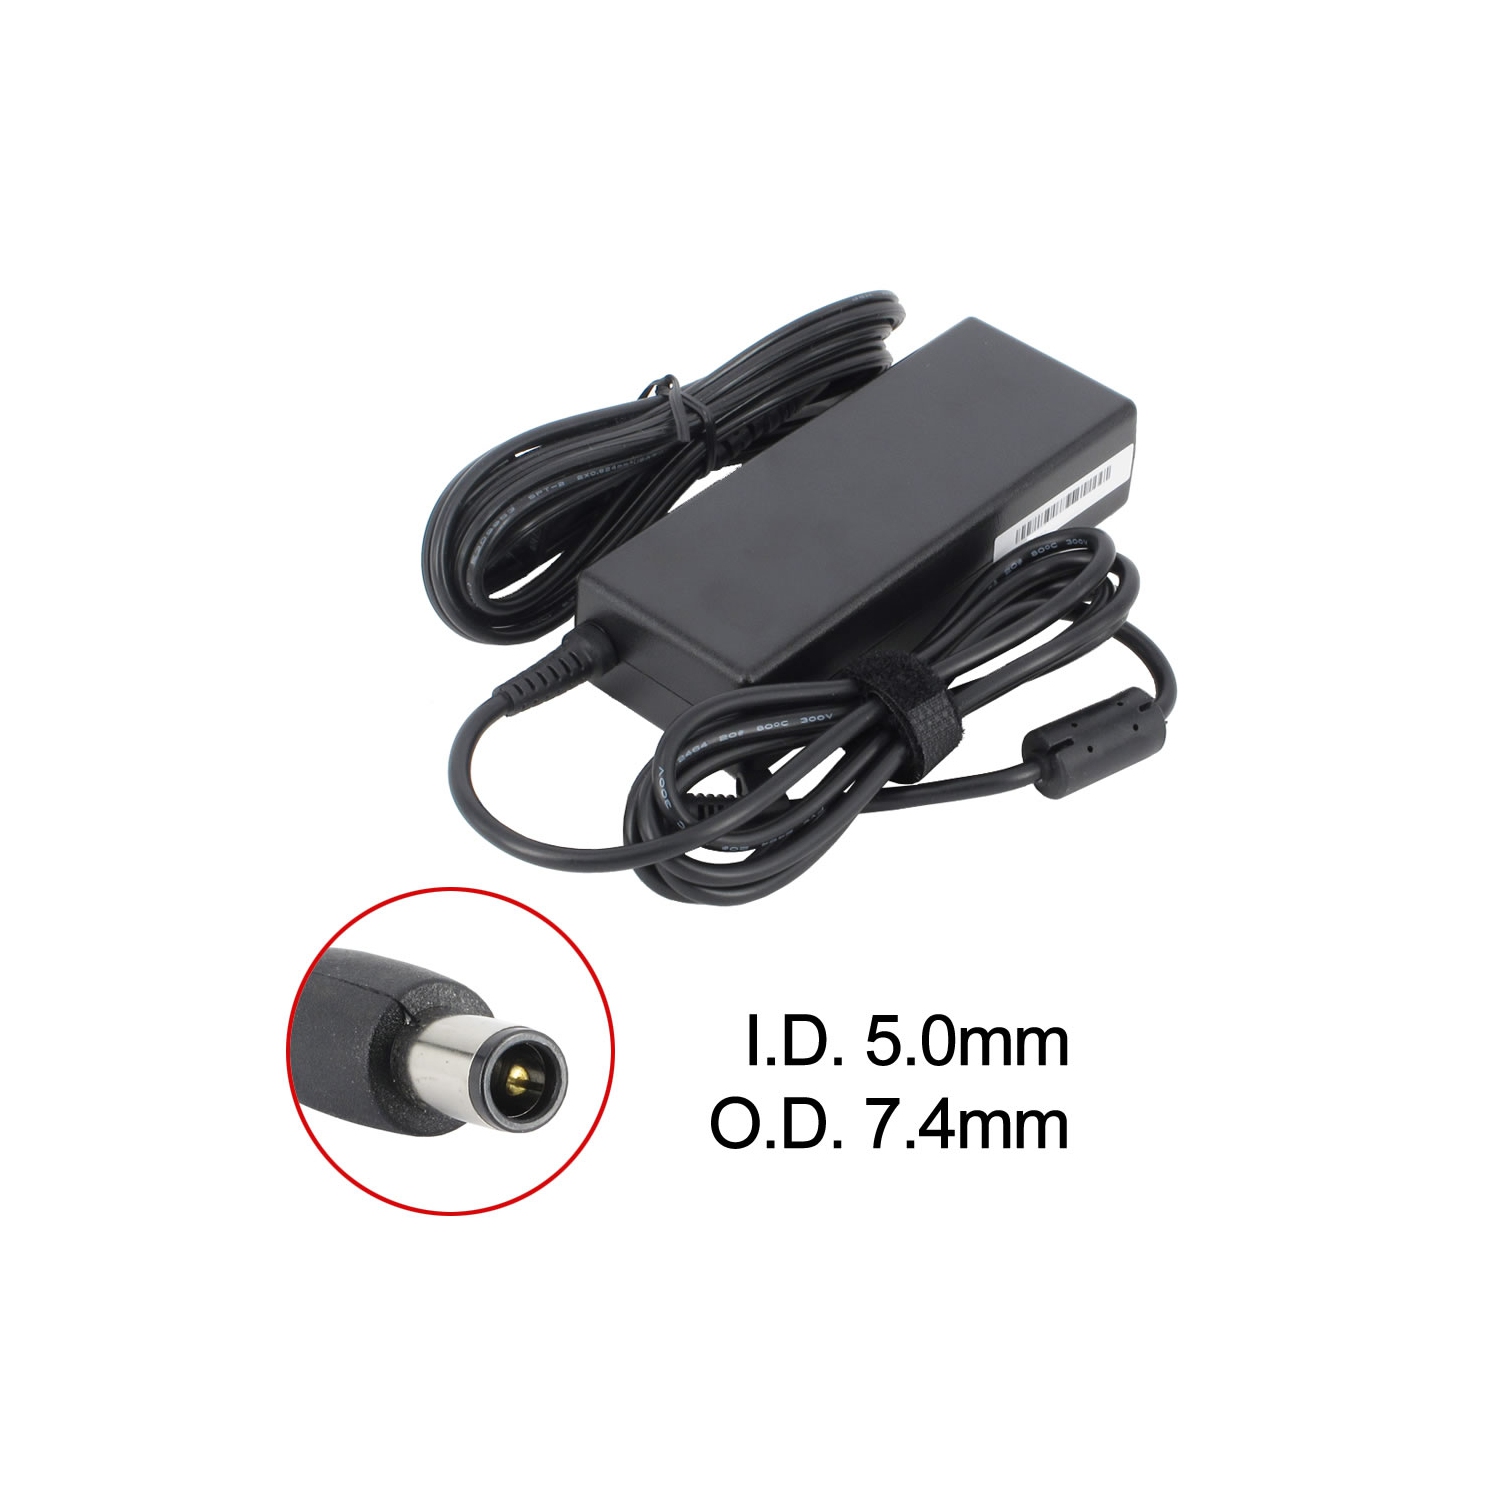 New Laptop AC Adapter for HP ProBook 440 G2, 412786-001, 463554-003, 609948-001, HP-AP091F13P SELF, PPP014L-SA